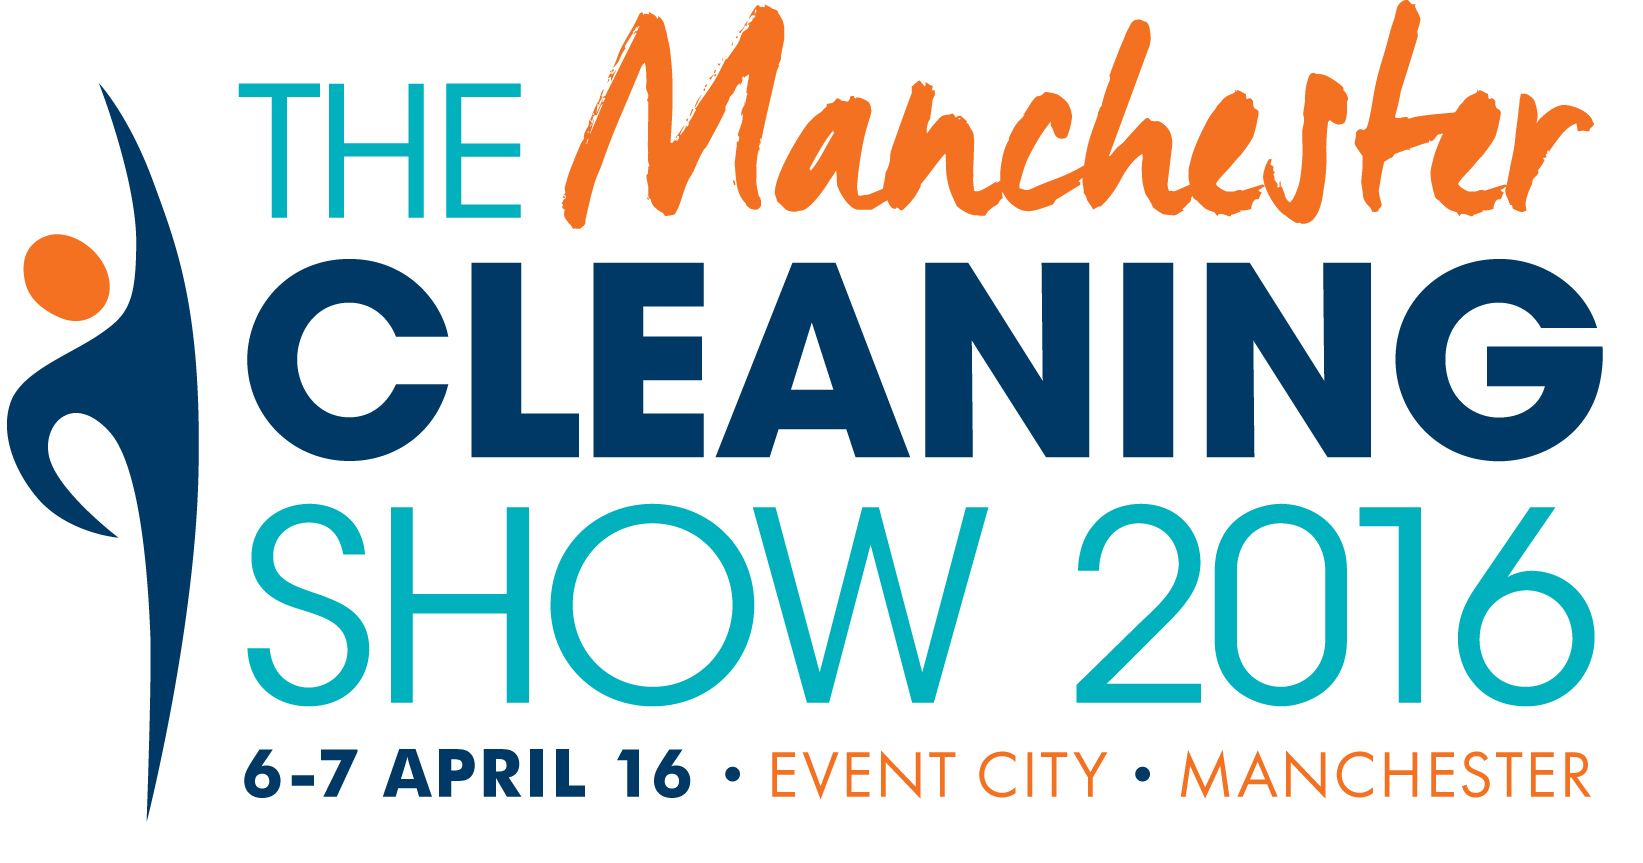 The Manchester Cleaning Show, 6-7 April 2016